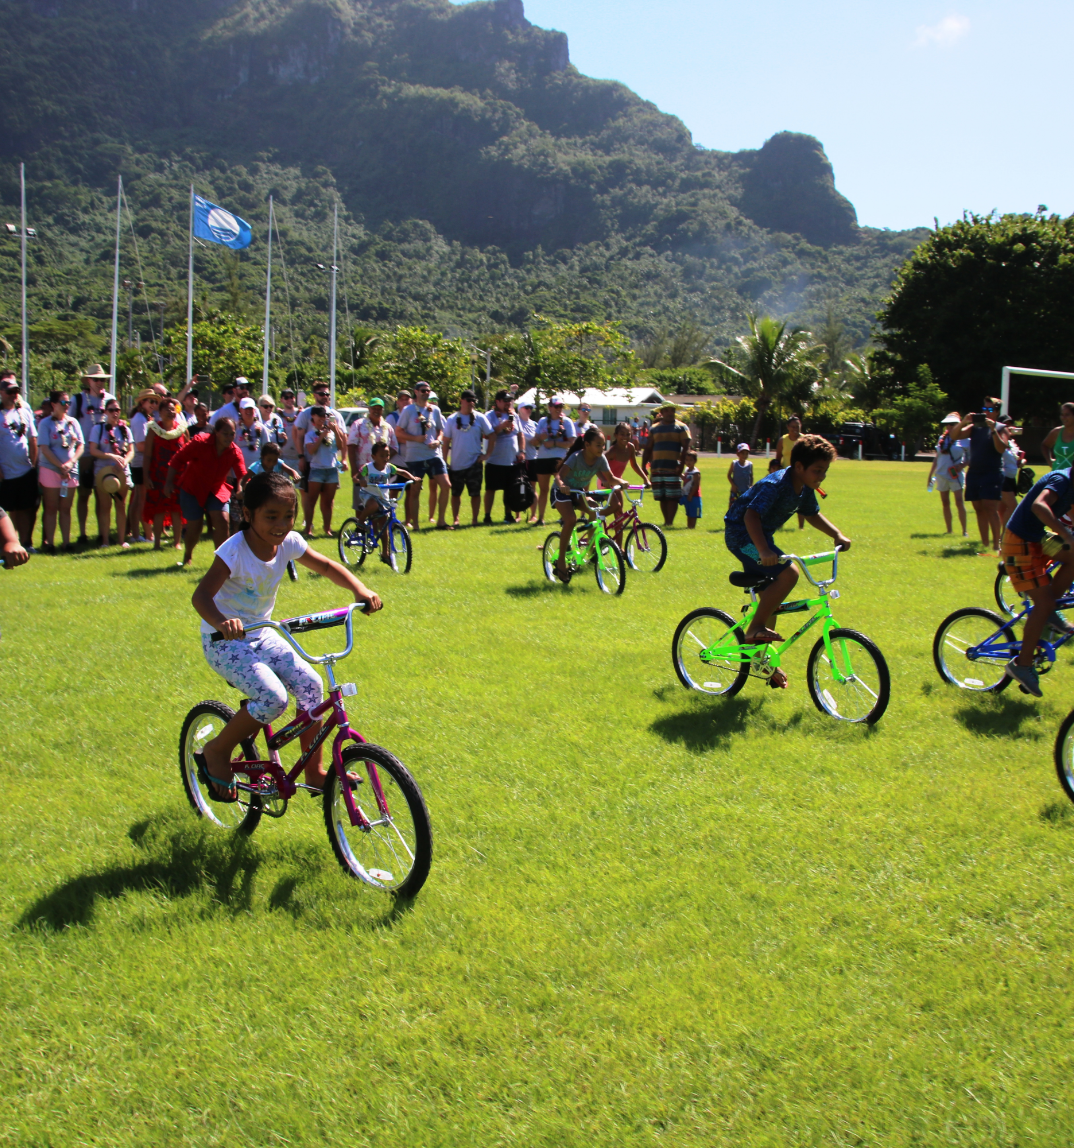 Photograph of a group of children riding bicycles